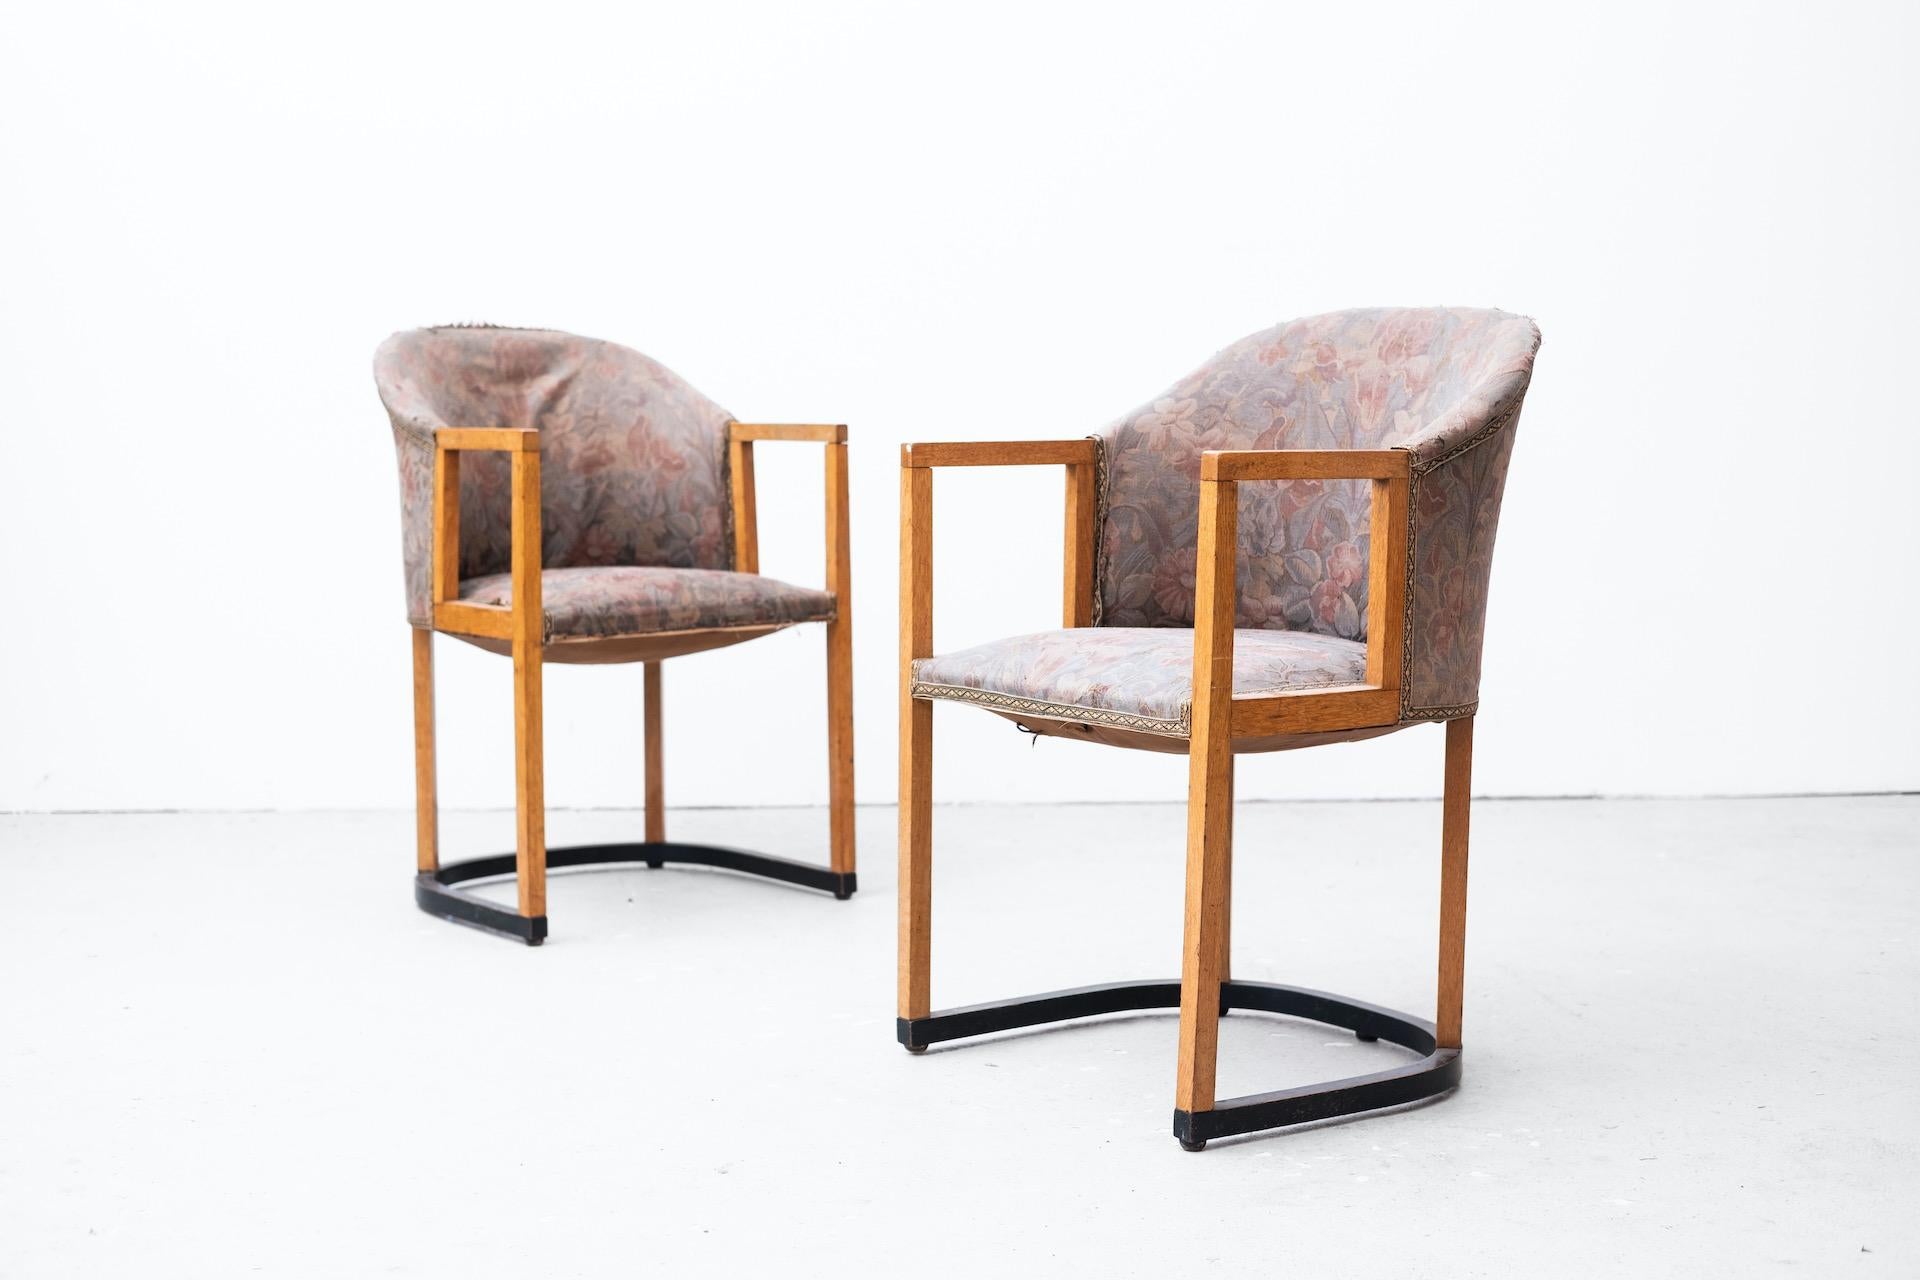 Vienna Secession 4 secessionistic armchairs by Wilhelm Schmidt (Student J. Hoffmann), Vienna 1908 For Sale